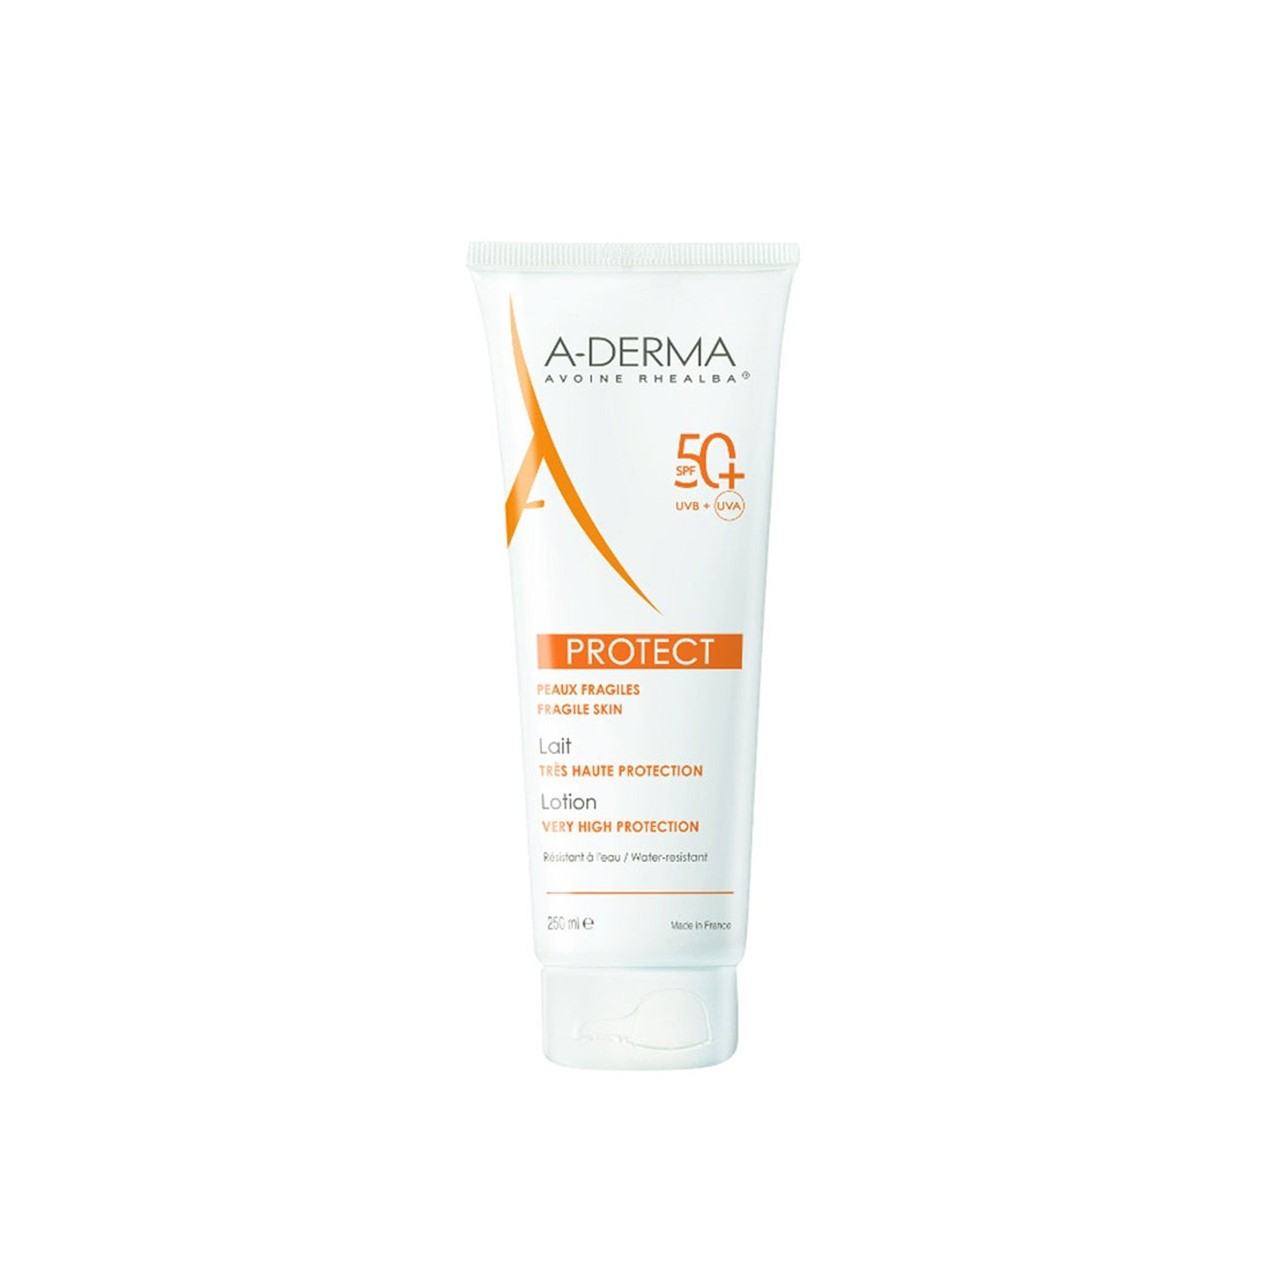 A-Derma Protect Lotion SPF50+ 250ml